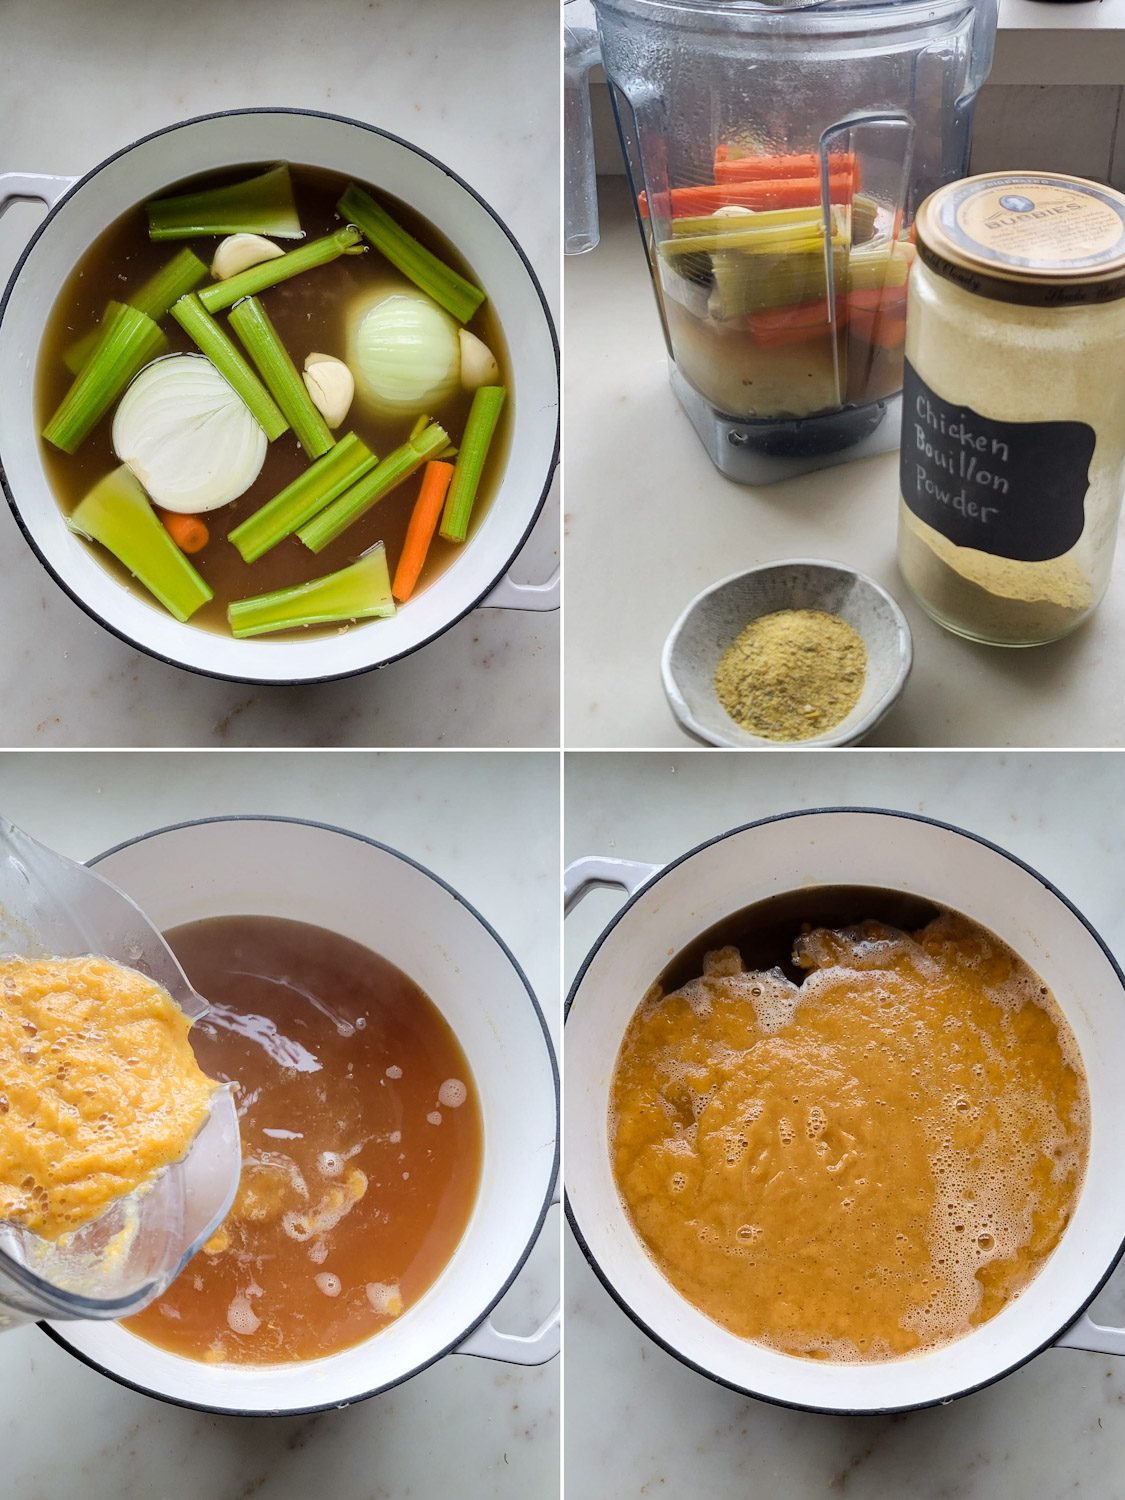 Collage showing the making of the Pastina broth.